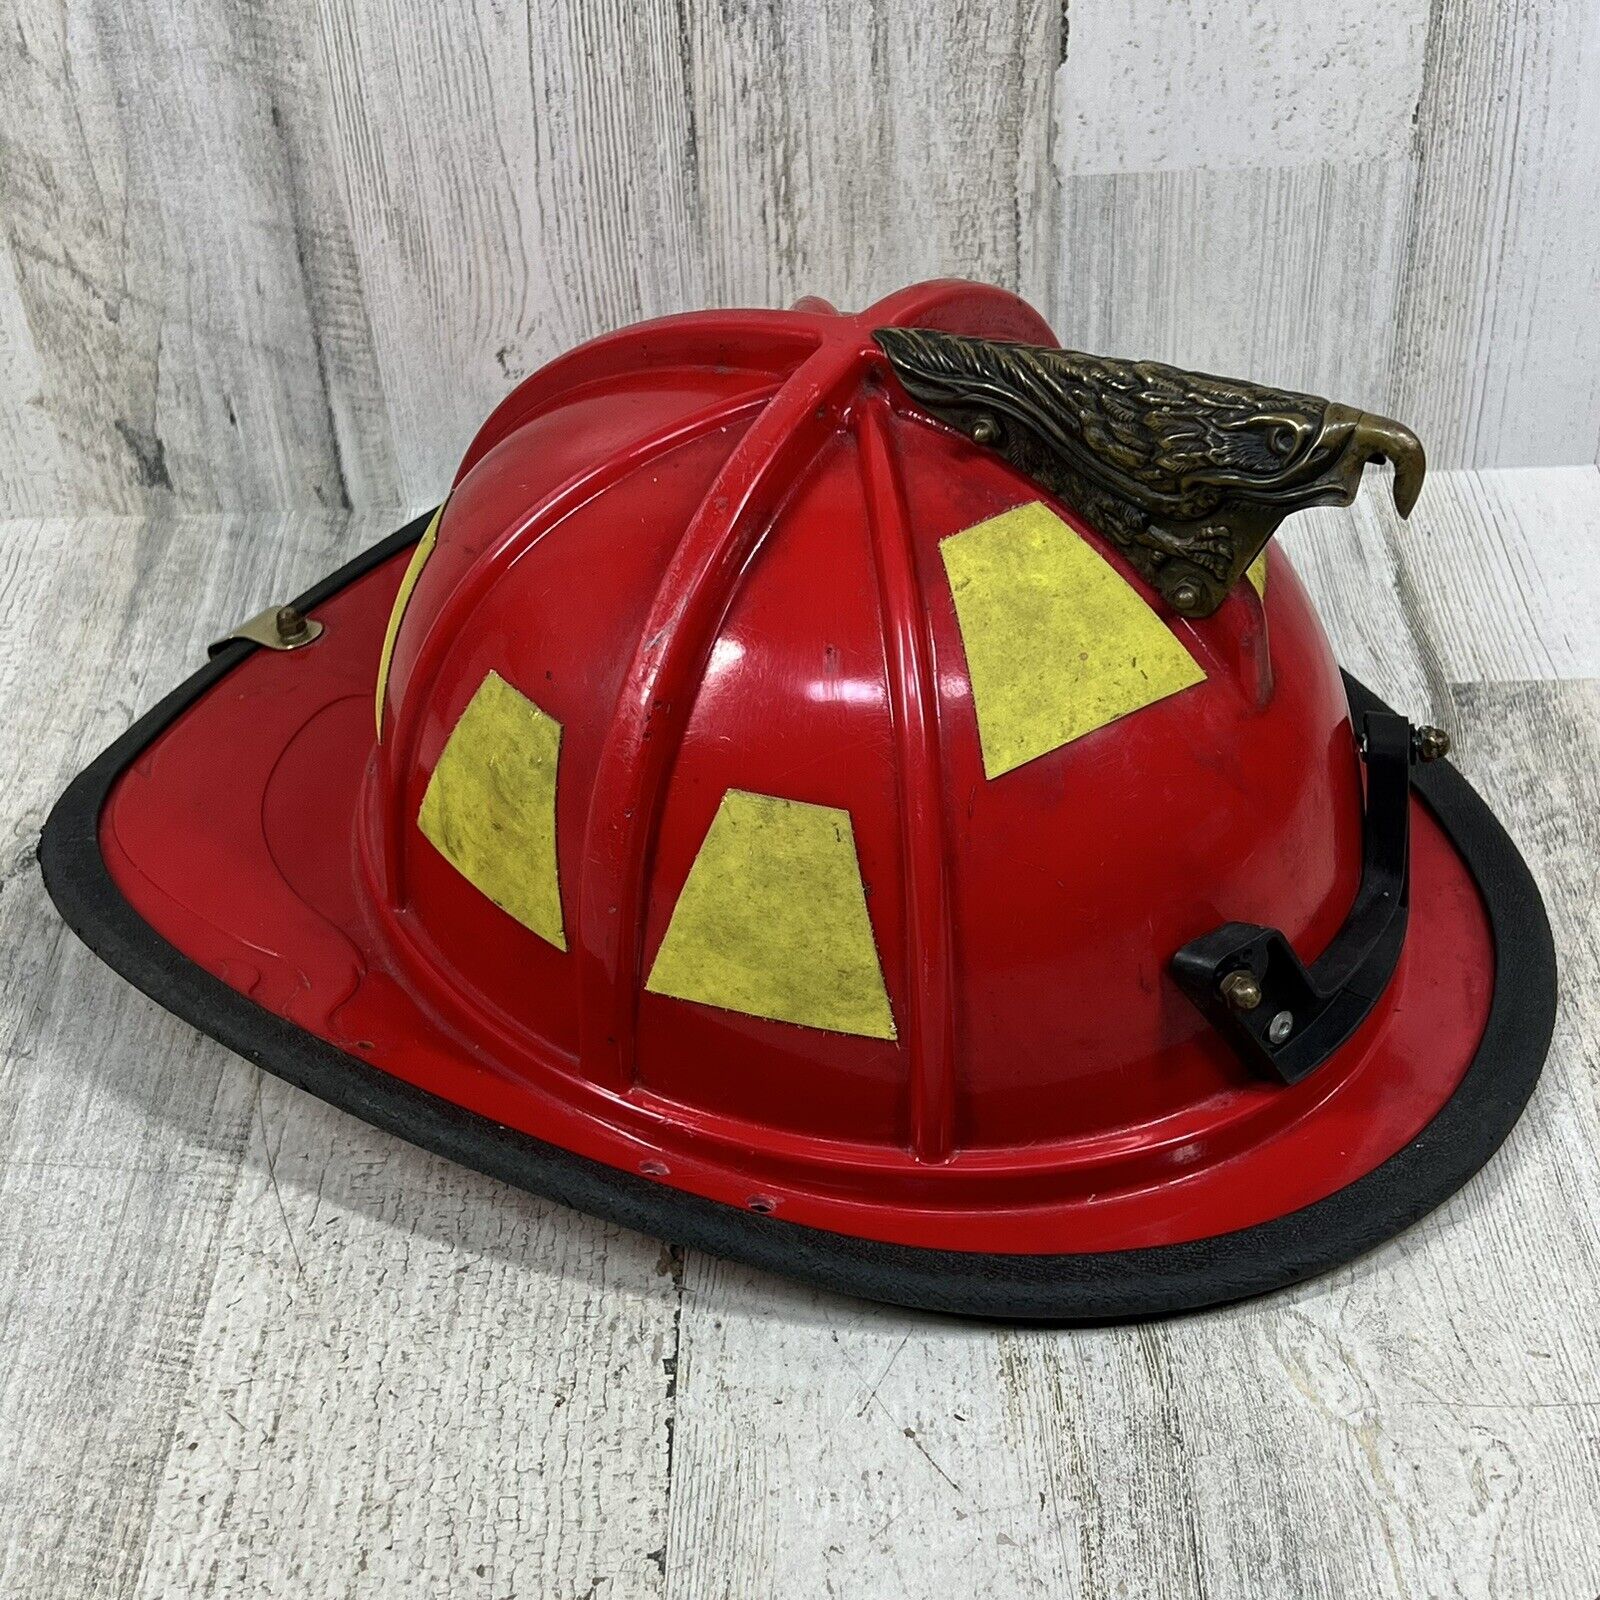 Paul Conway Shields American Classic Firefighter Helmet Red Brass Eagle LFH2120S